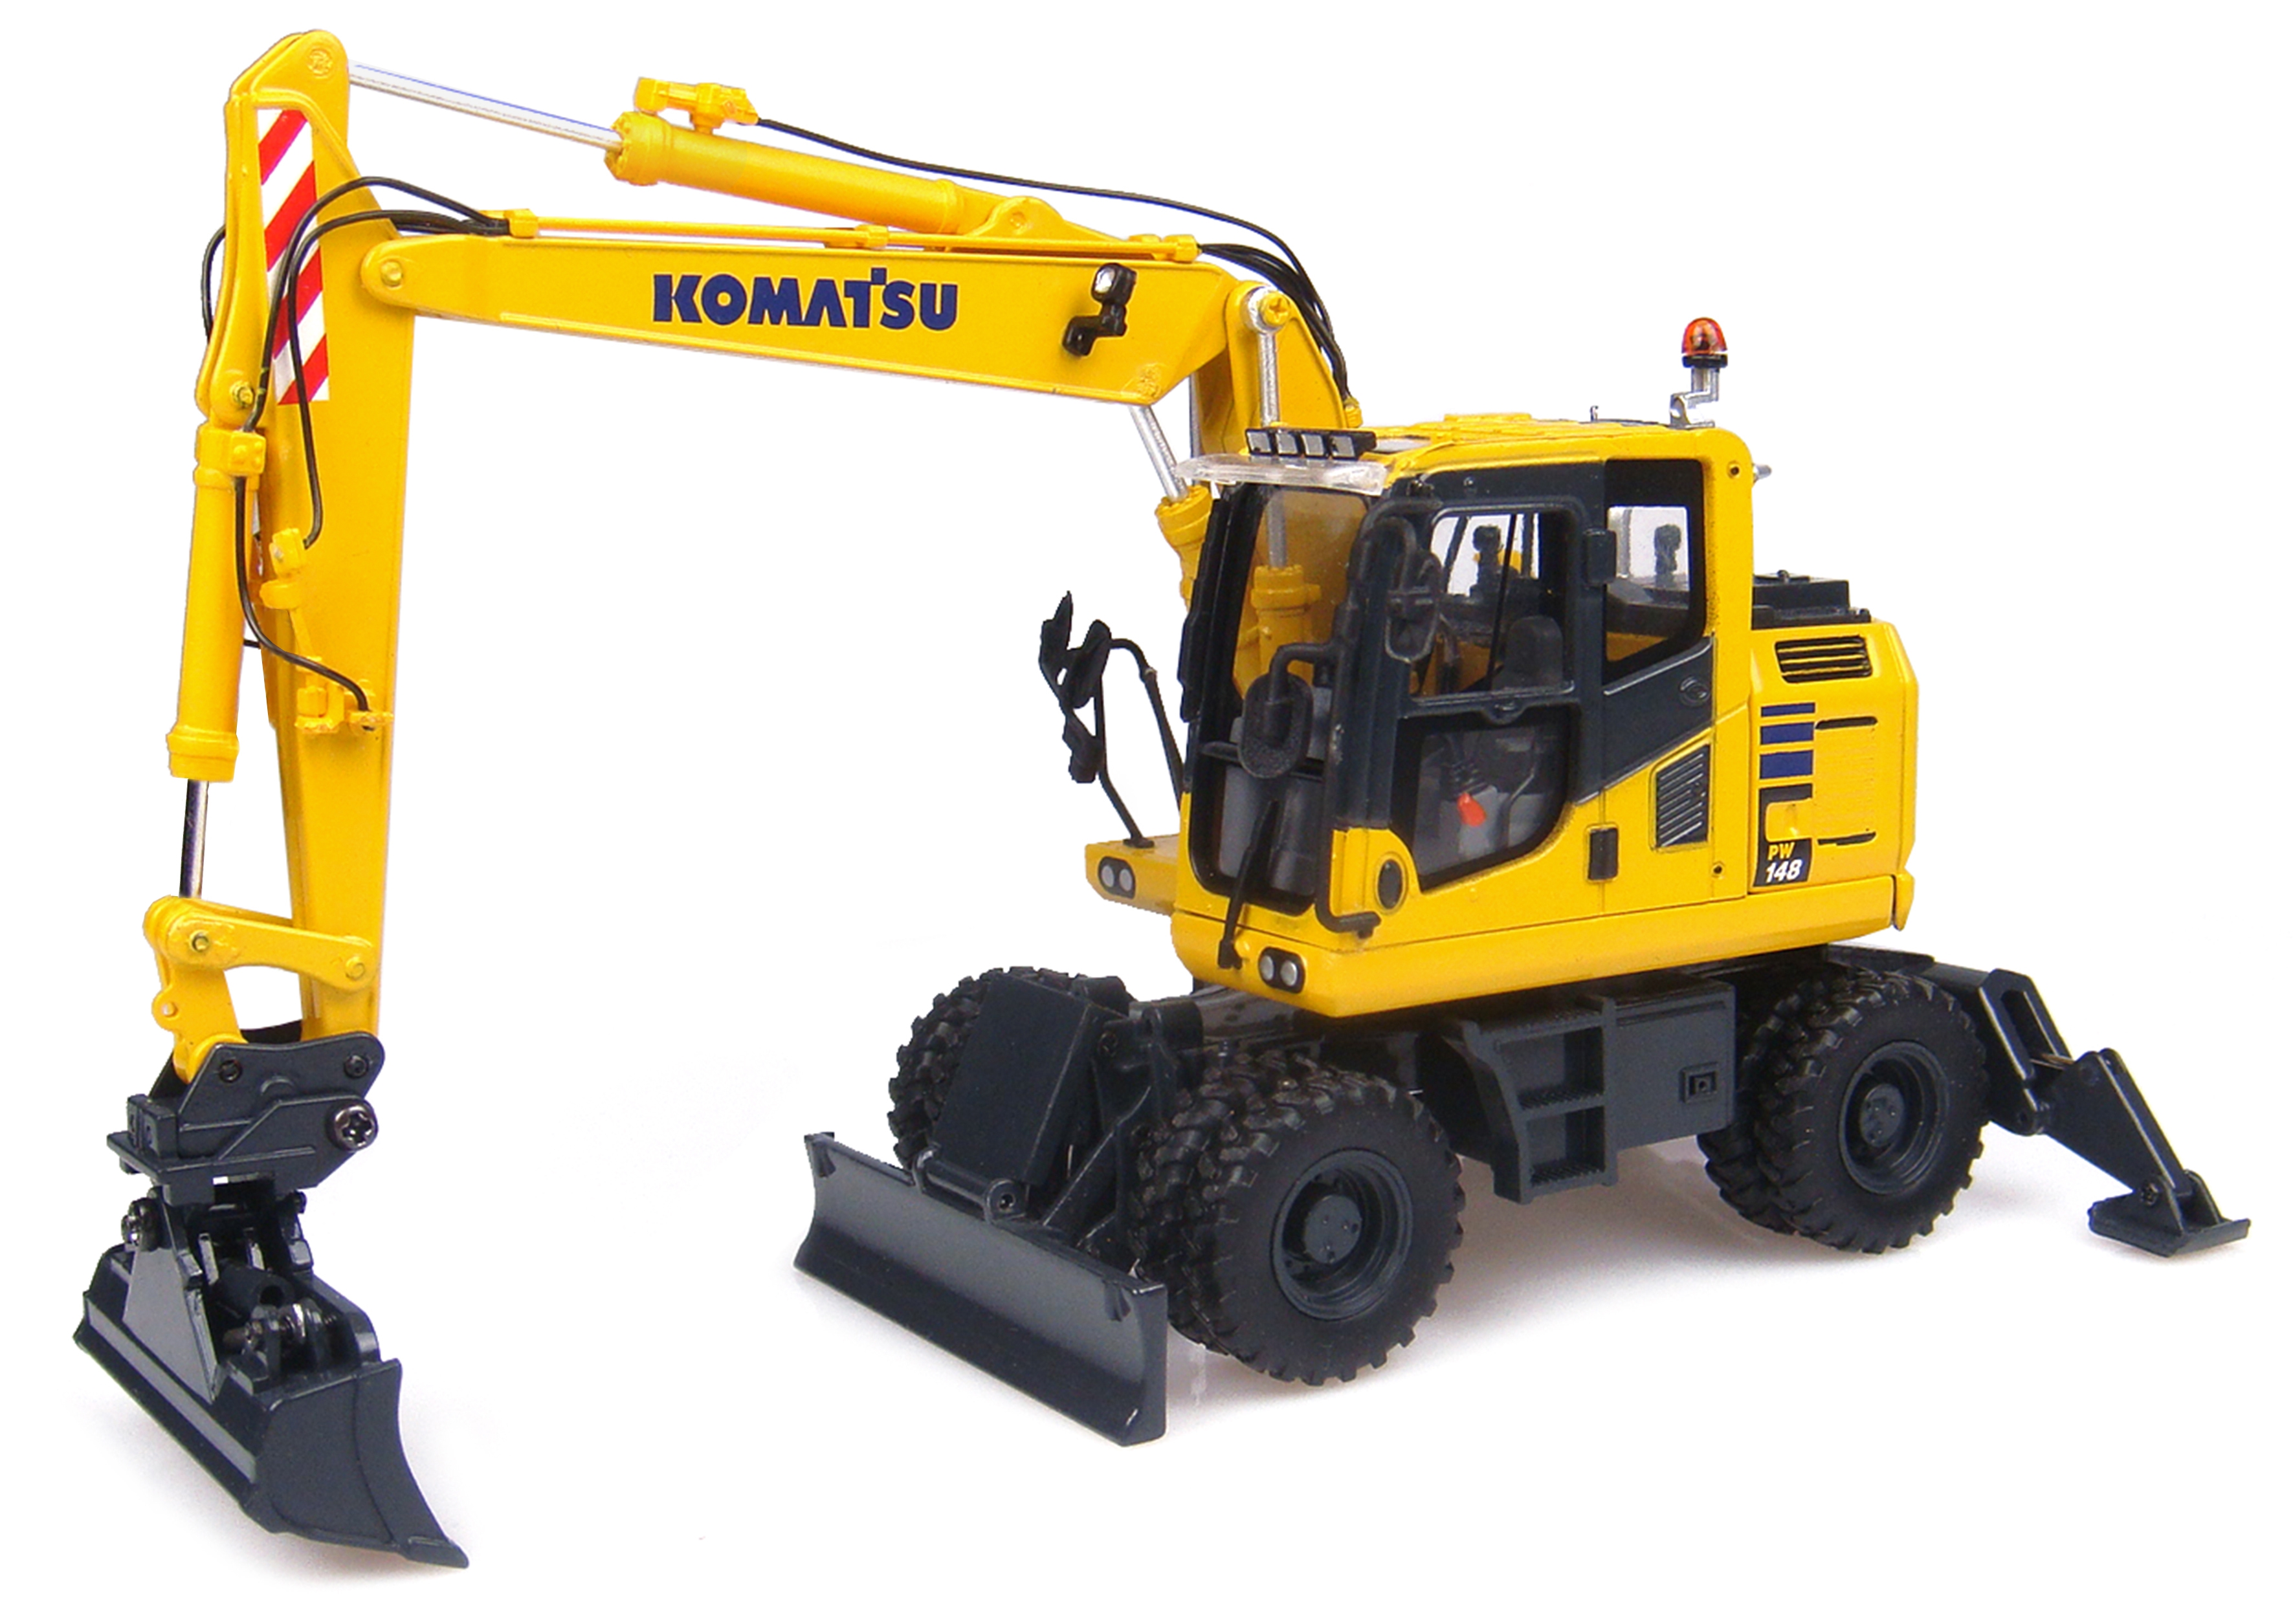 Komatsu Pw148-10 Wheeled Excavator With Standard And Ditch Cleaning Buckets 1/50 Diecast Model By Universal Hobbies